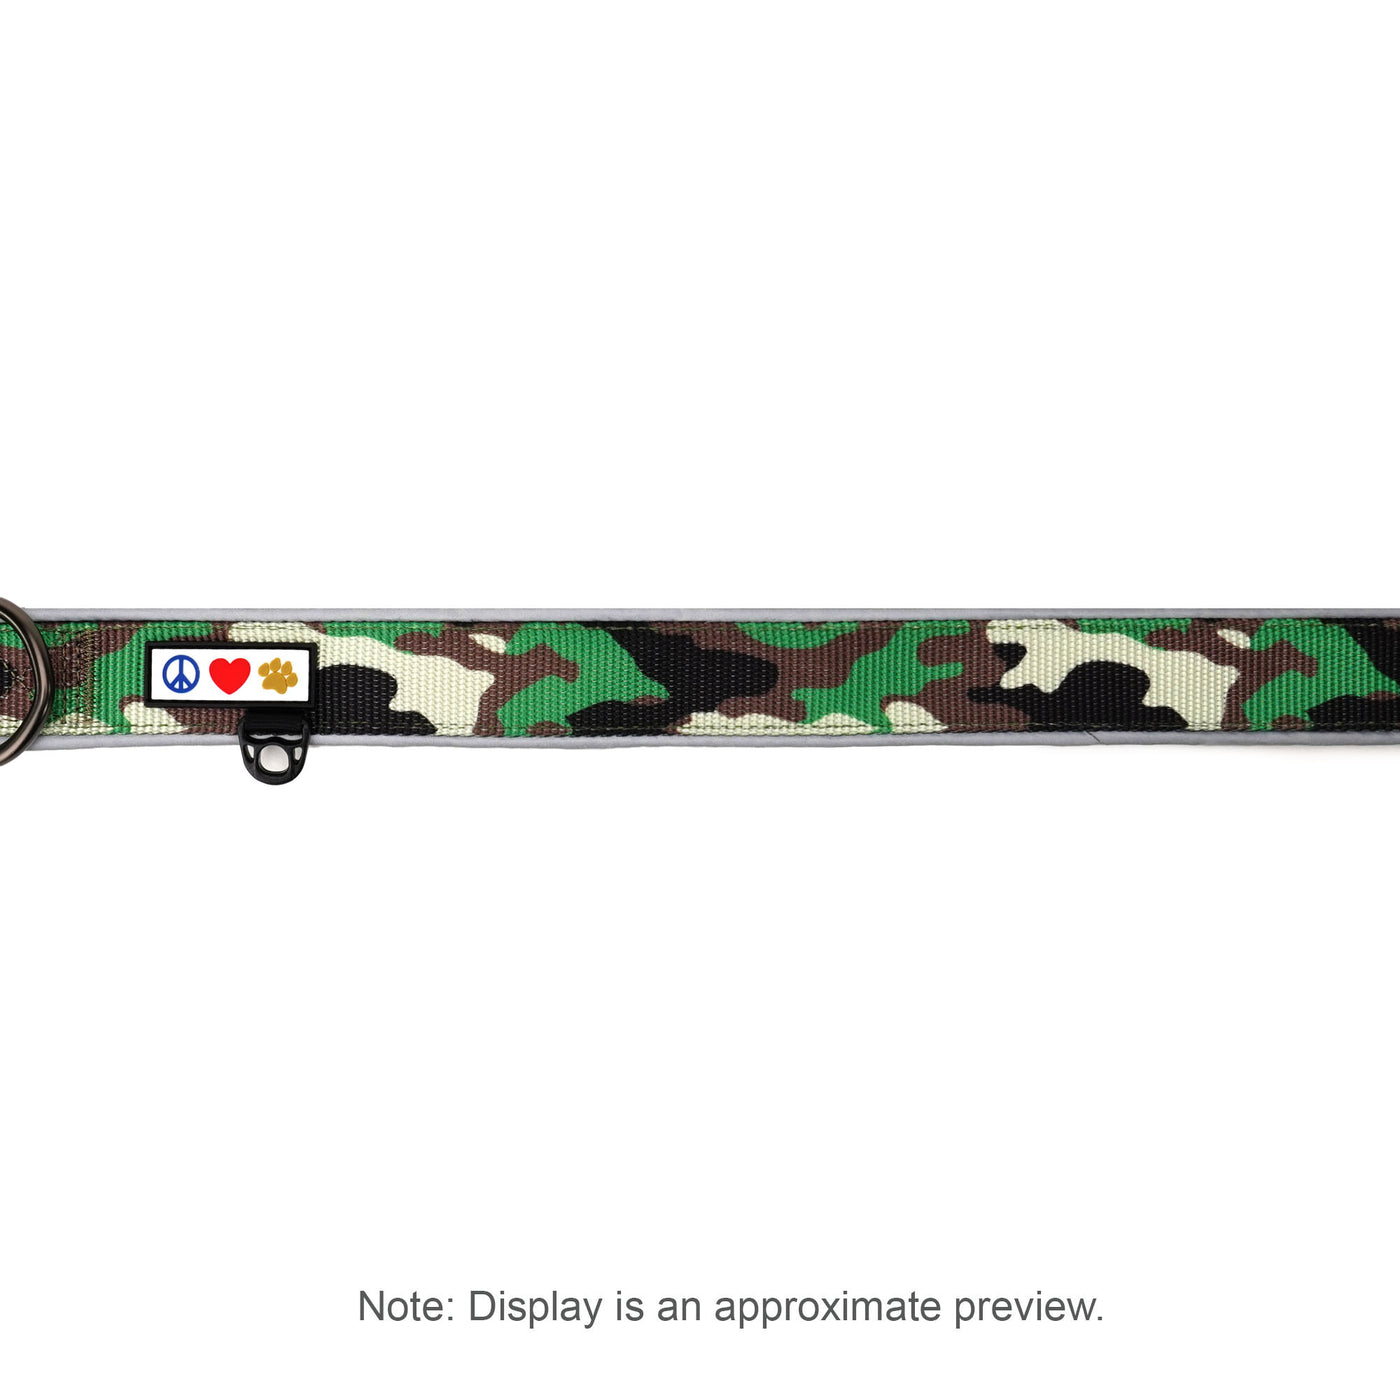 Personalized Camouflage Padded Dog Collar